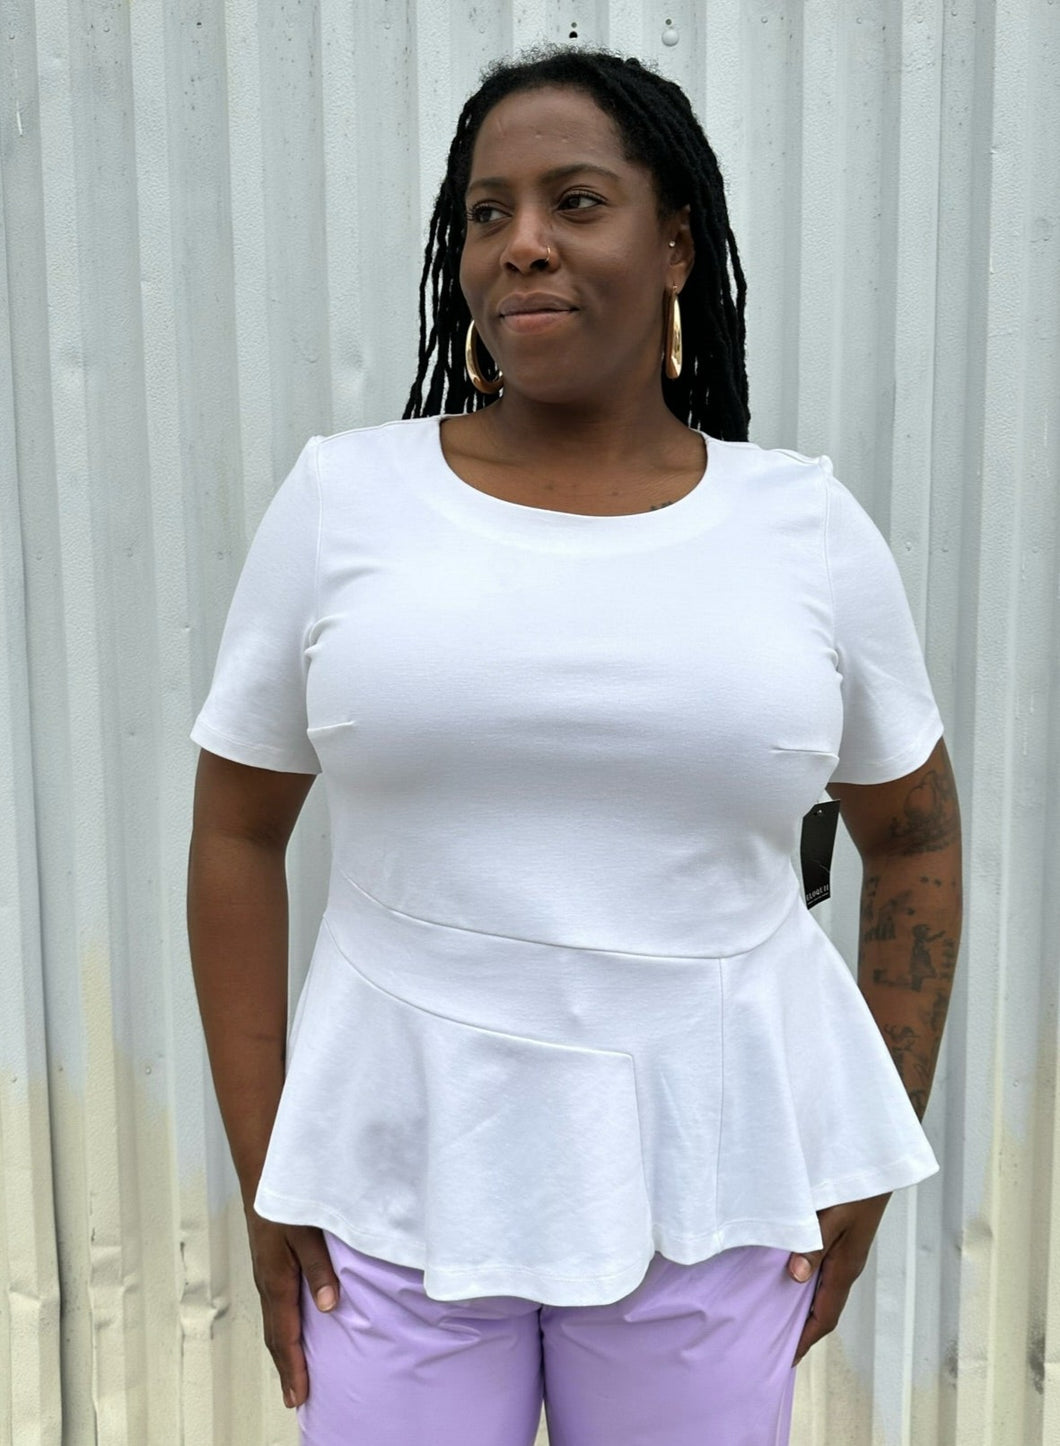 Front view of a size 16 Eloquii white tee with ruffle hem and asymmetrical stitching detail styled with lavender pleather pants on a size 14/16 model. The photo is taken outside in natural lighting.